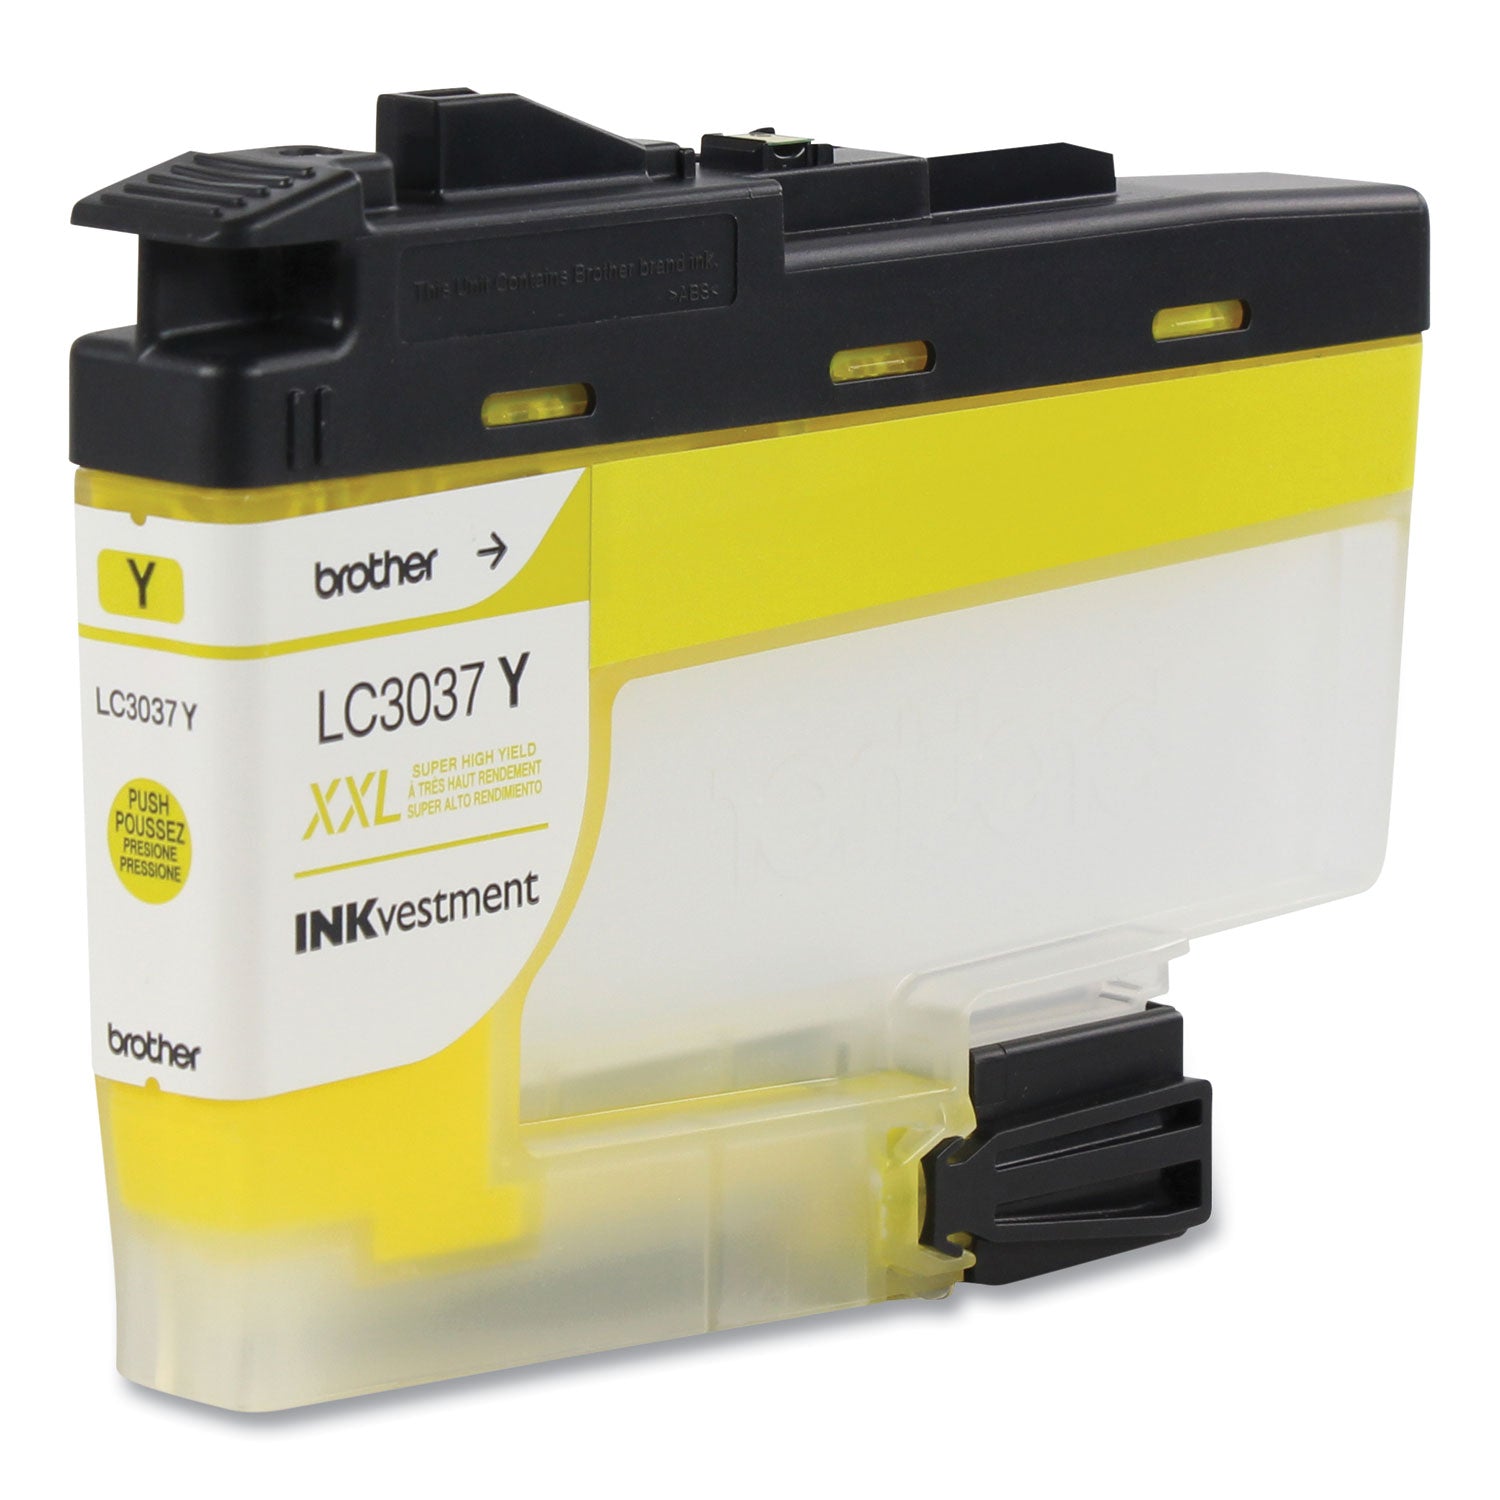 lc3037y-inkvestment-super-high-yield-ink-1500-page-yield-yellow_brtlc3037y - 2